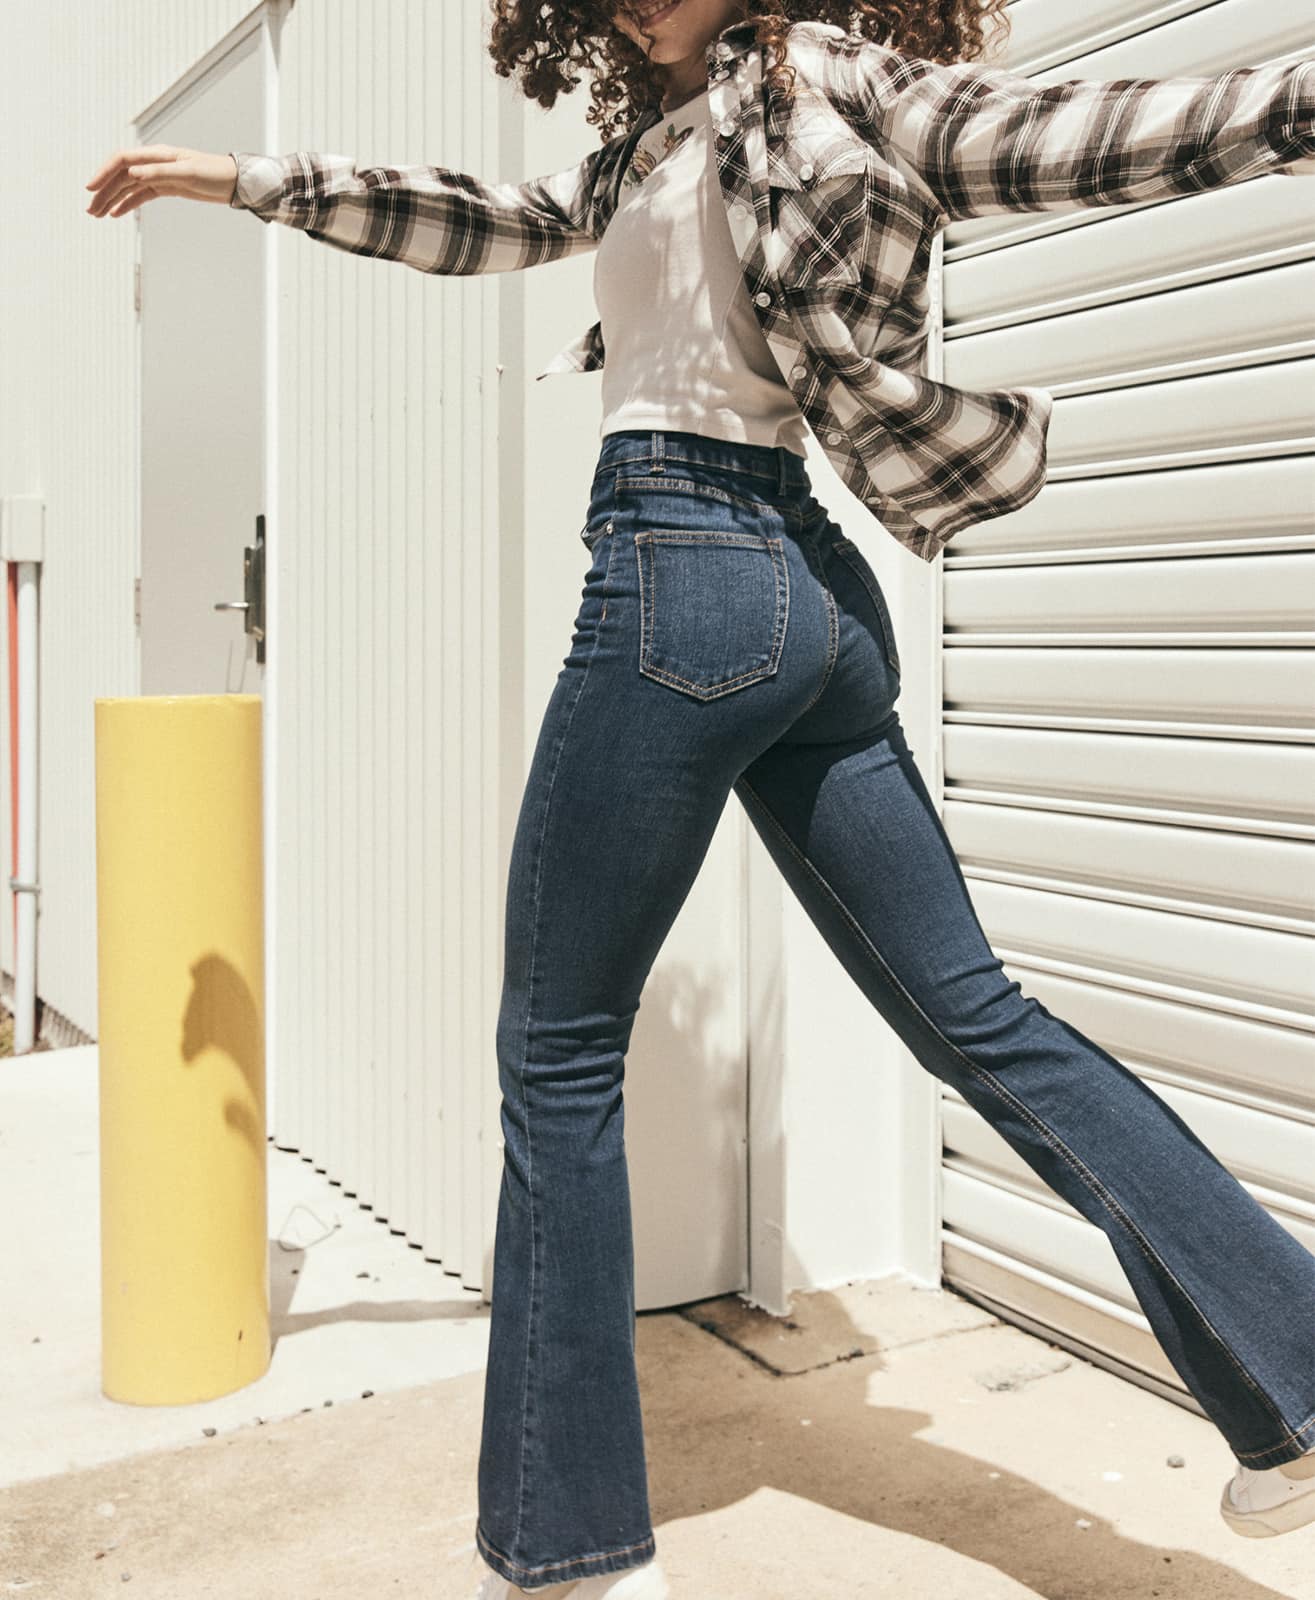 Jeans - The Latest & Greatest High Rise Jeans | Jay Jays™ Online